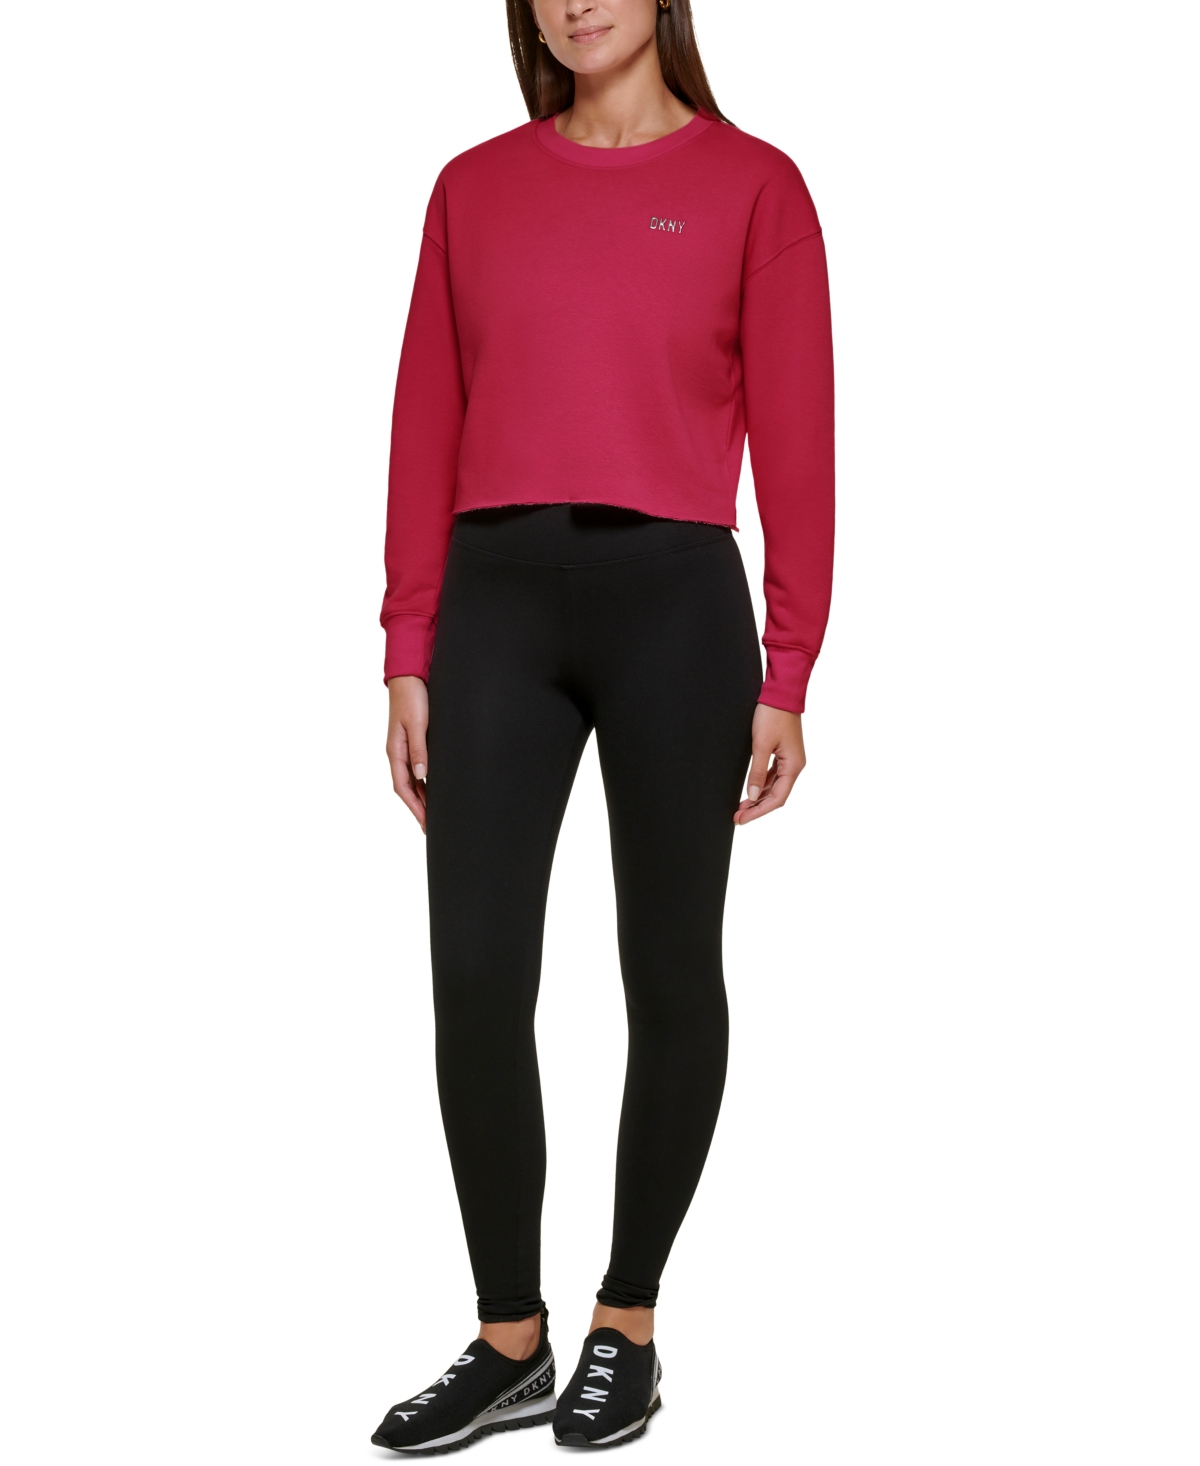  Dkny Sport Women's Cropped Pullover